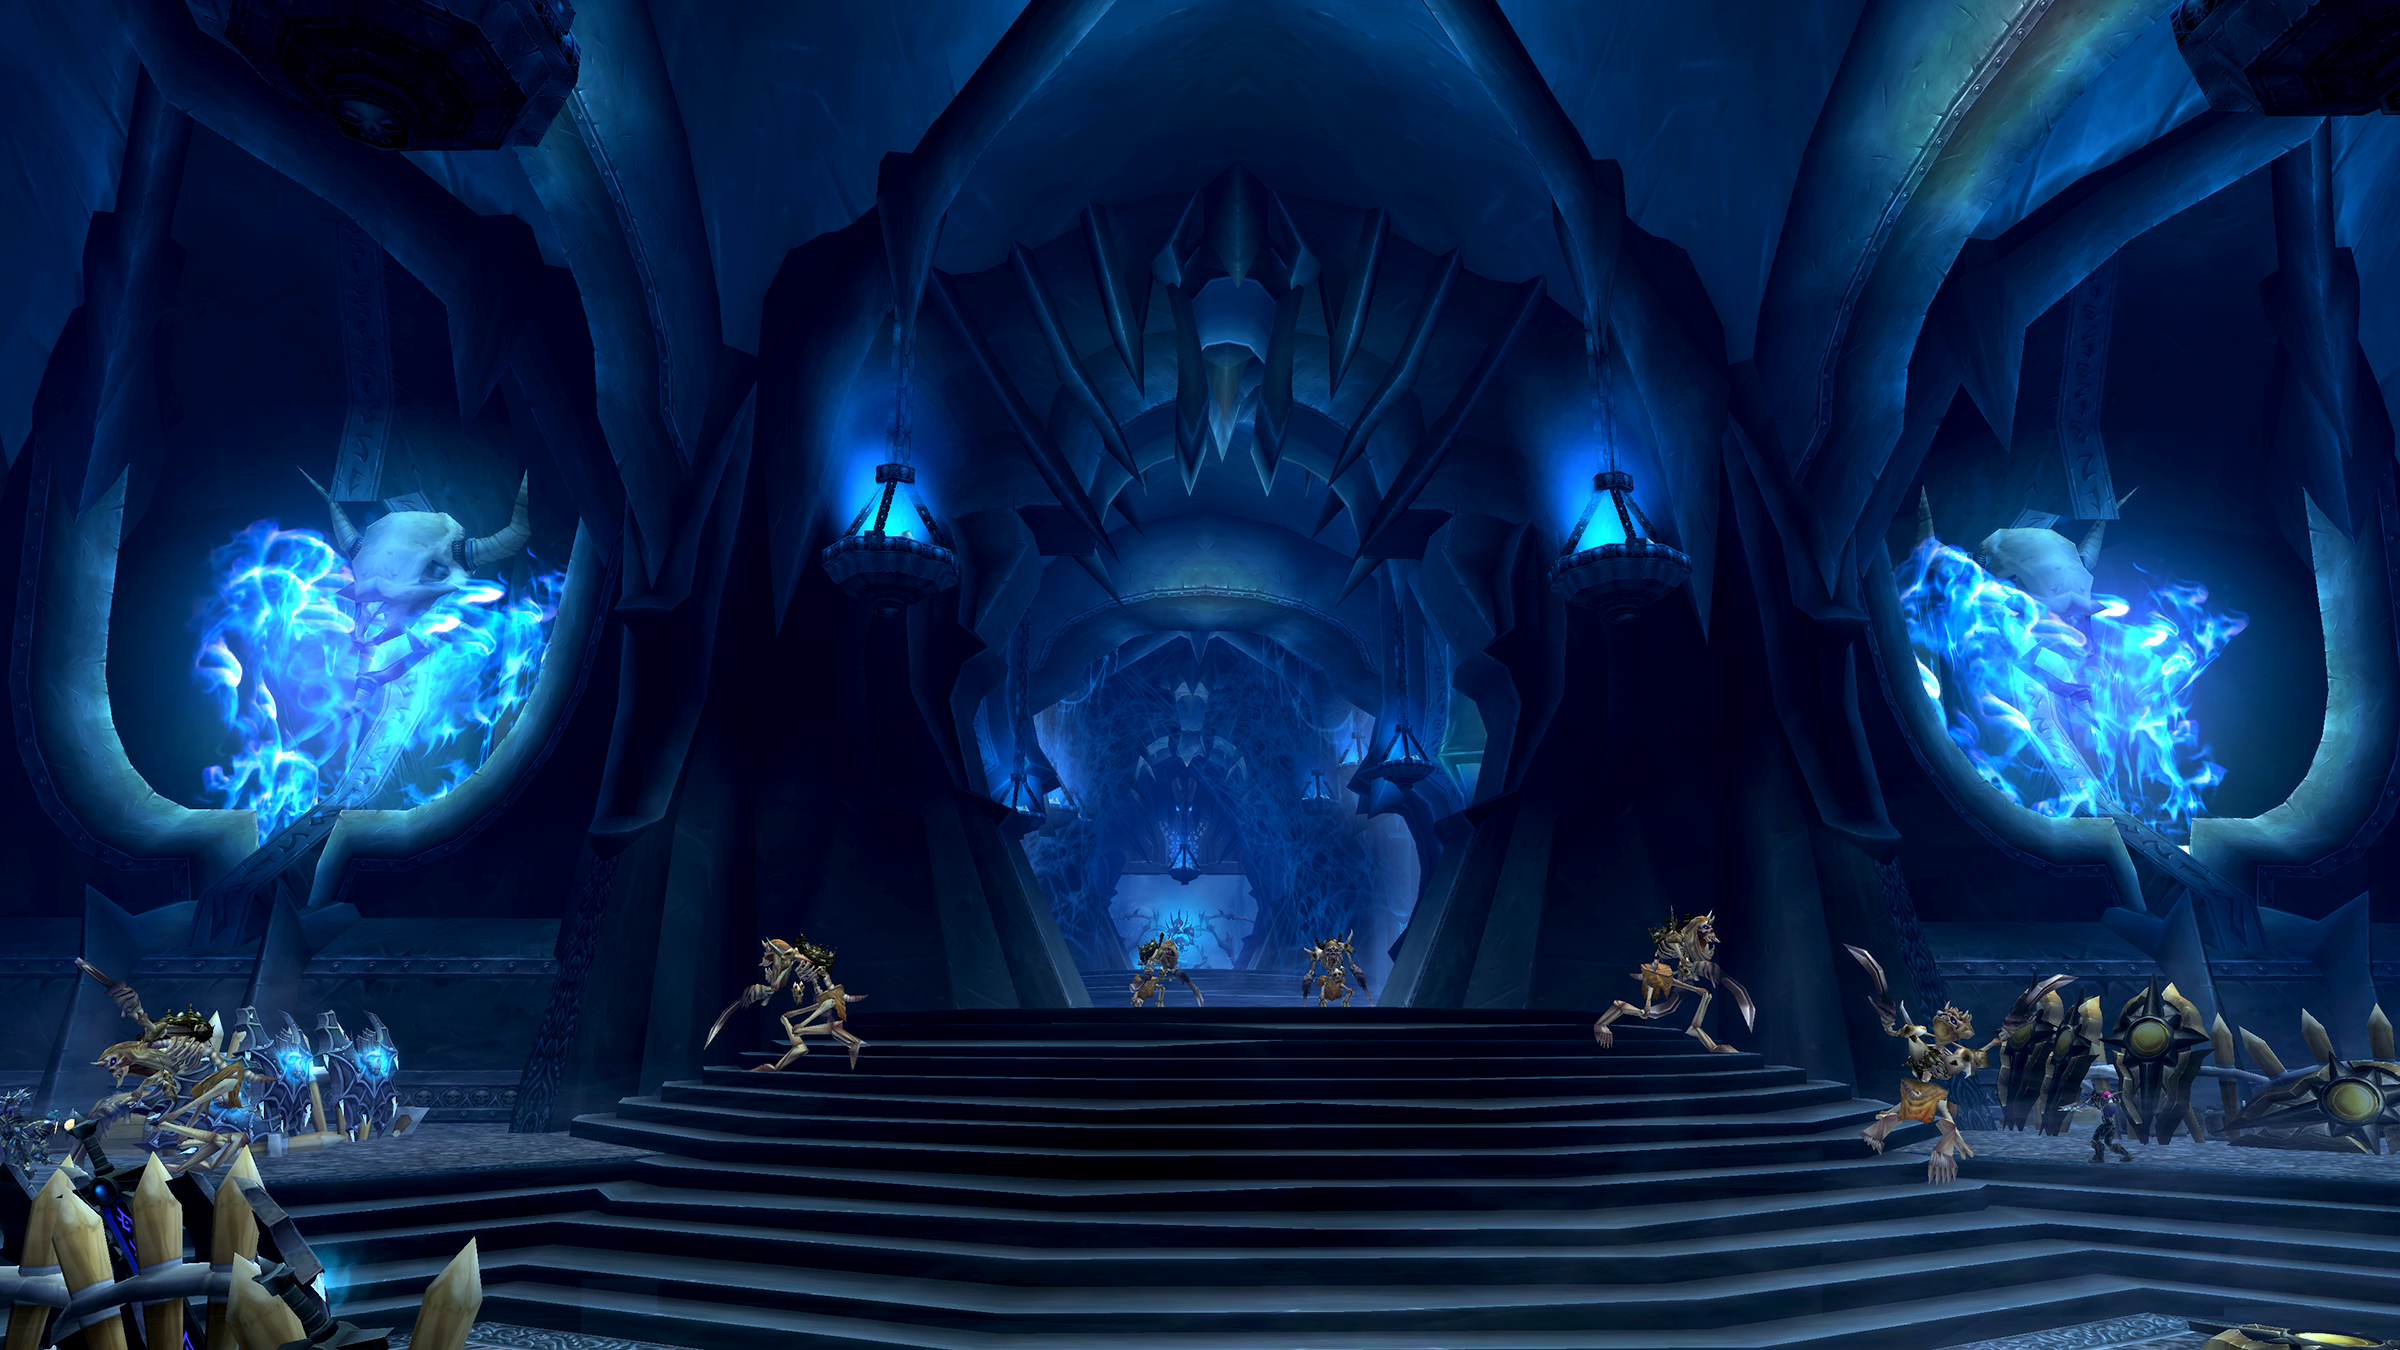 Wrath of the Lich King Classic: The Way into the Icecrown Citadel is Open!